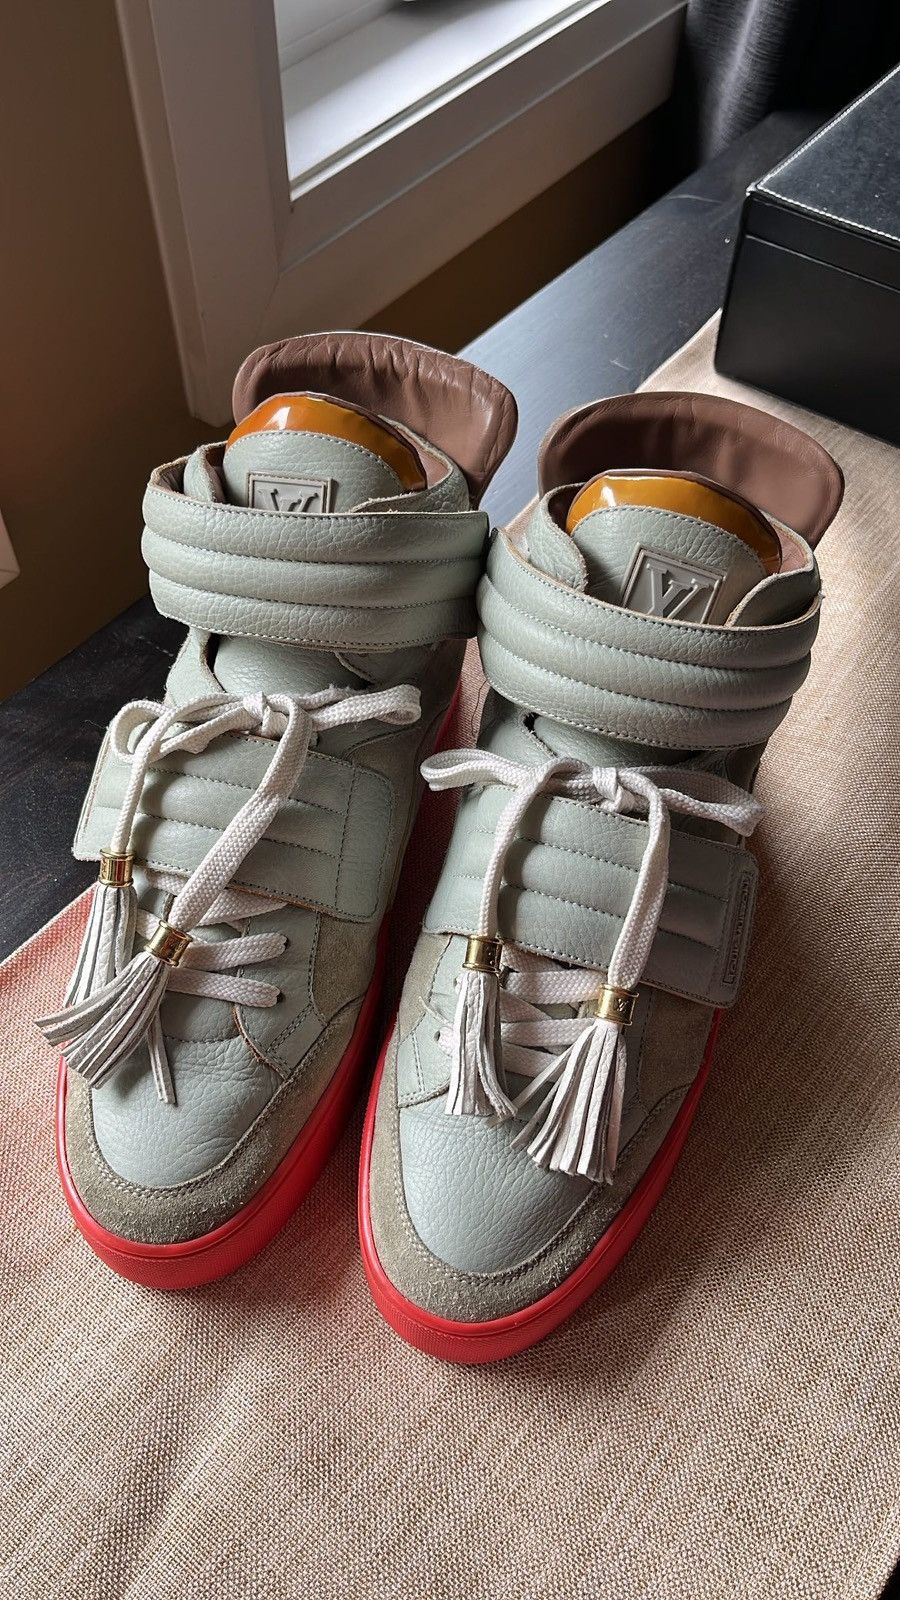 100% Authentic Louis Vuitton X Kanye West Cream Jaspers Dons